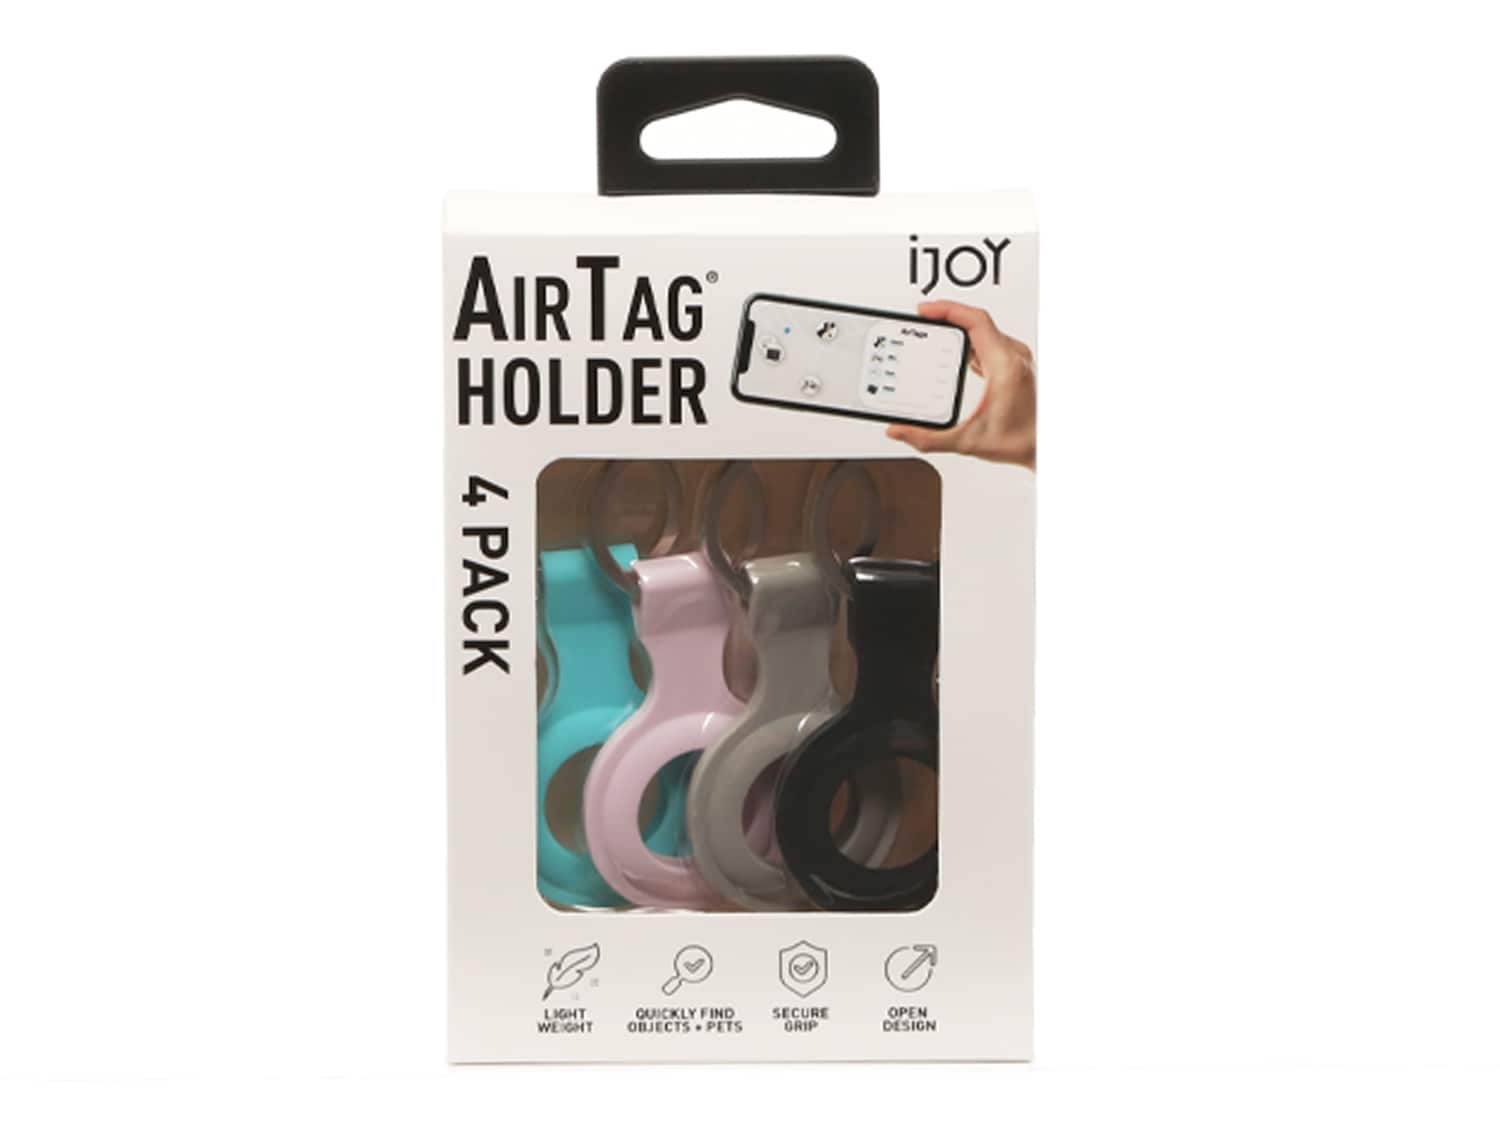 ijoy Air Tag Keychain Holder Assortment Pack IJATAST01 - The Home Depot